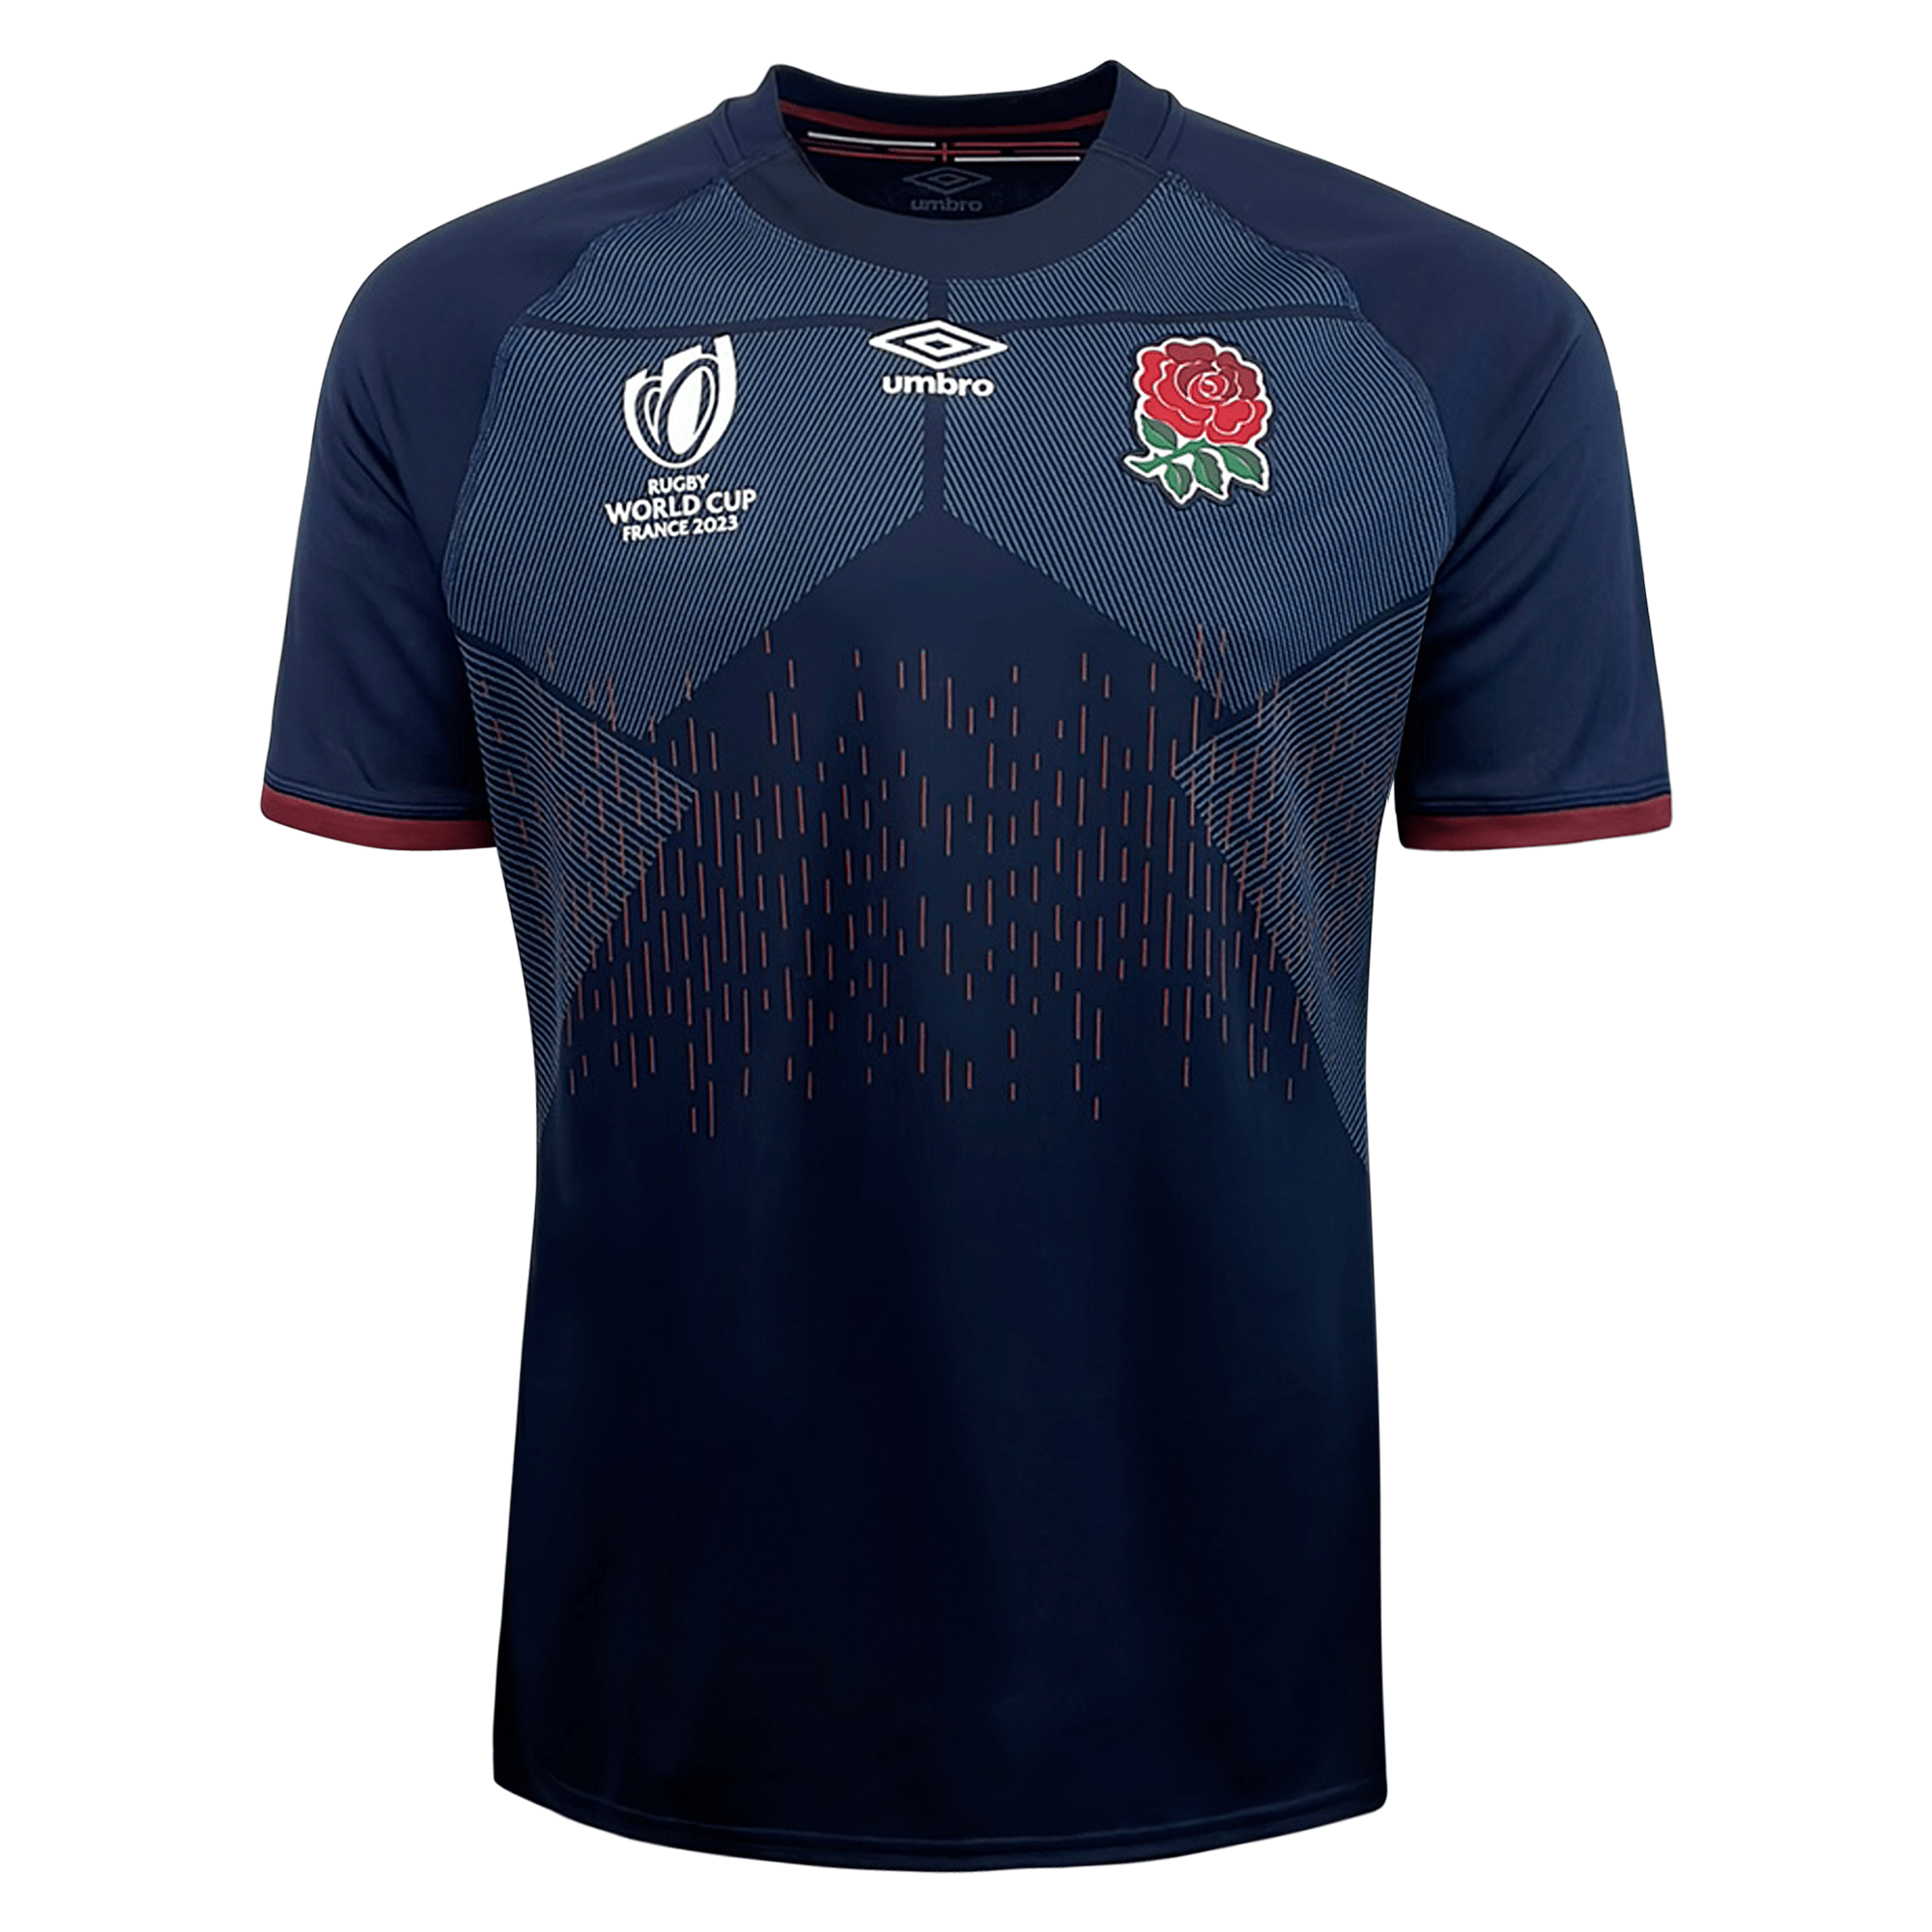 England's jersey for the 2023 World Cup, currently being worn by